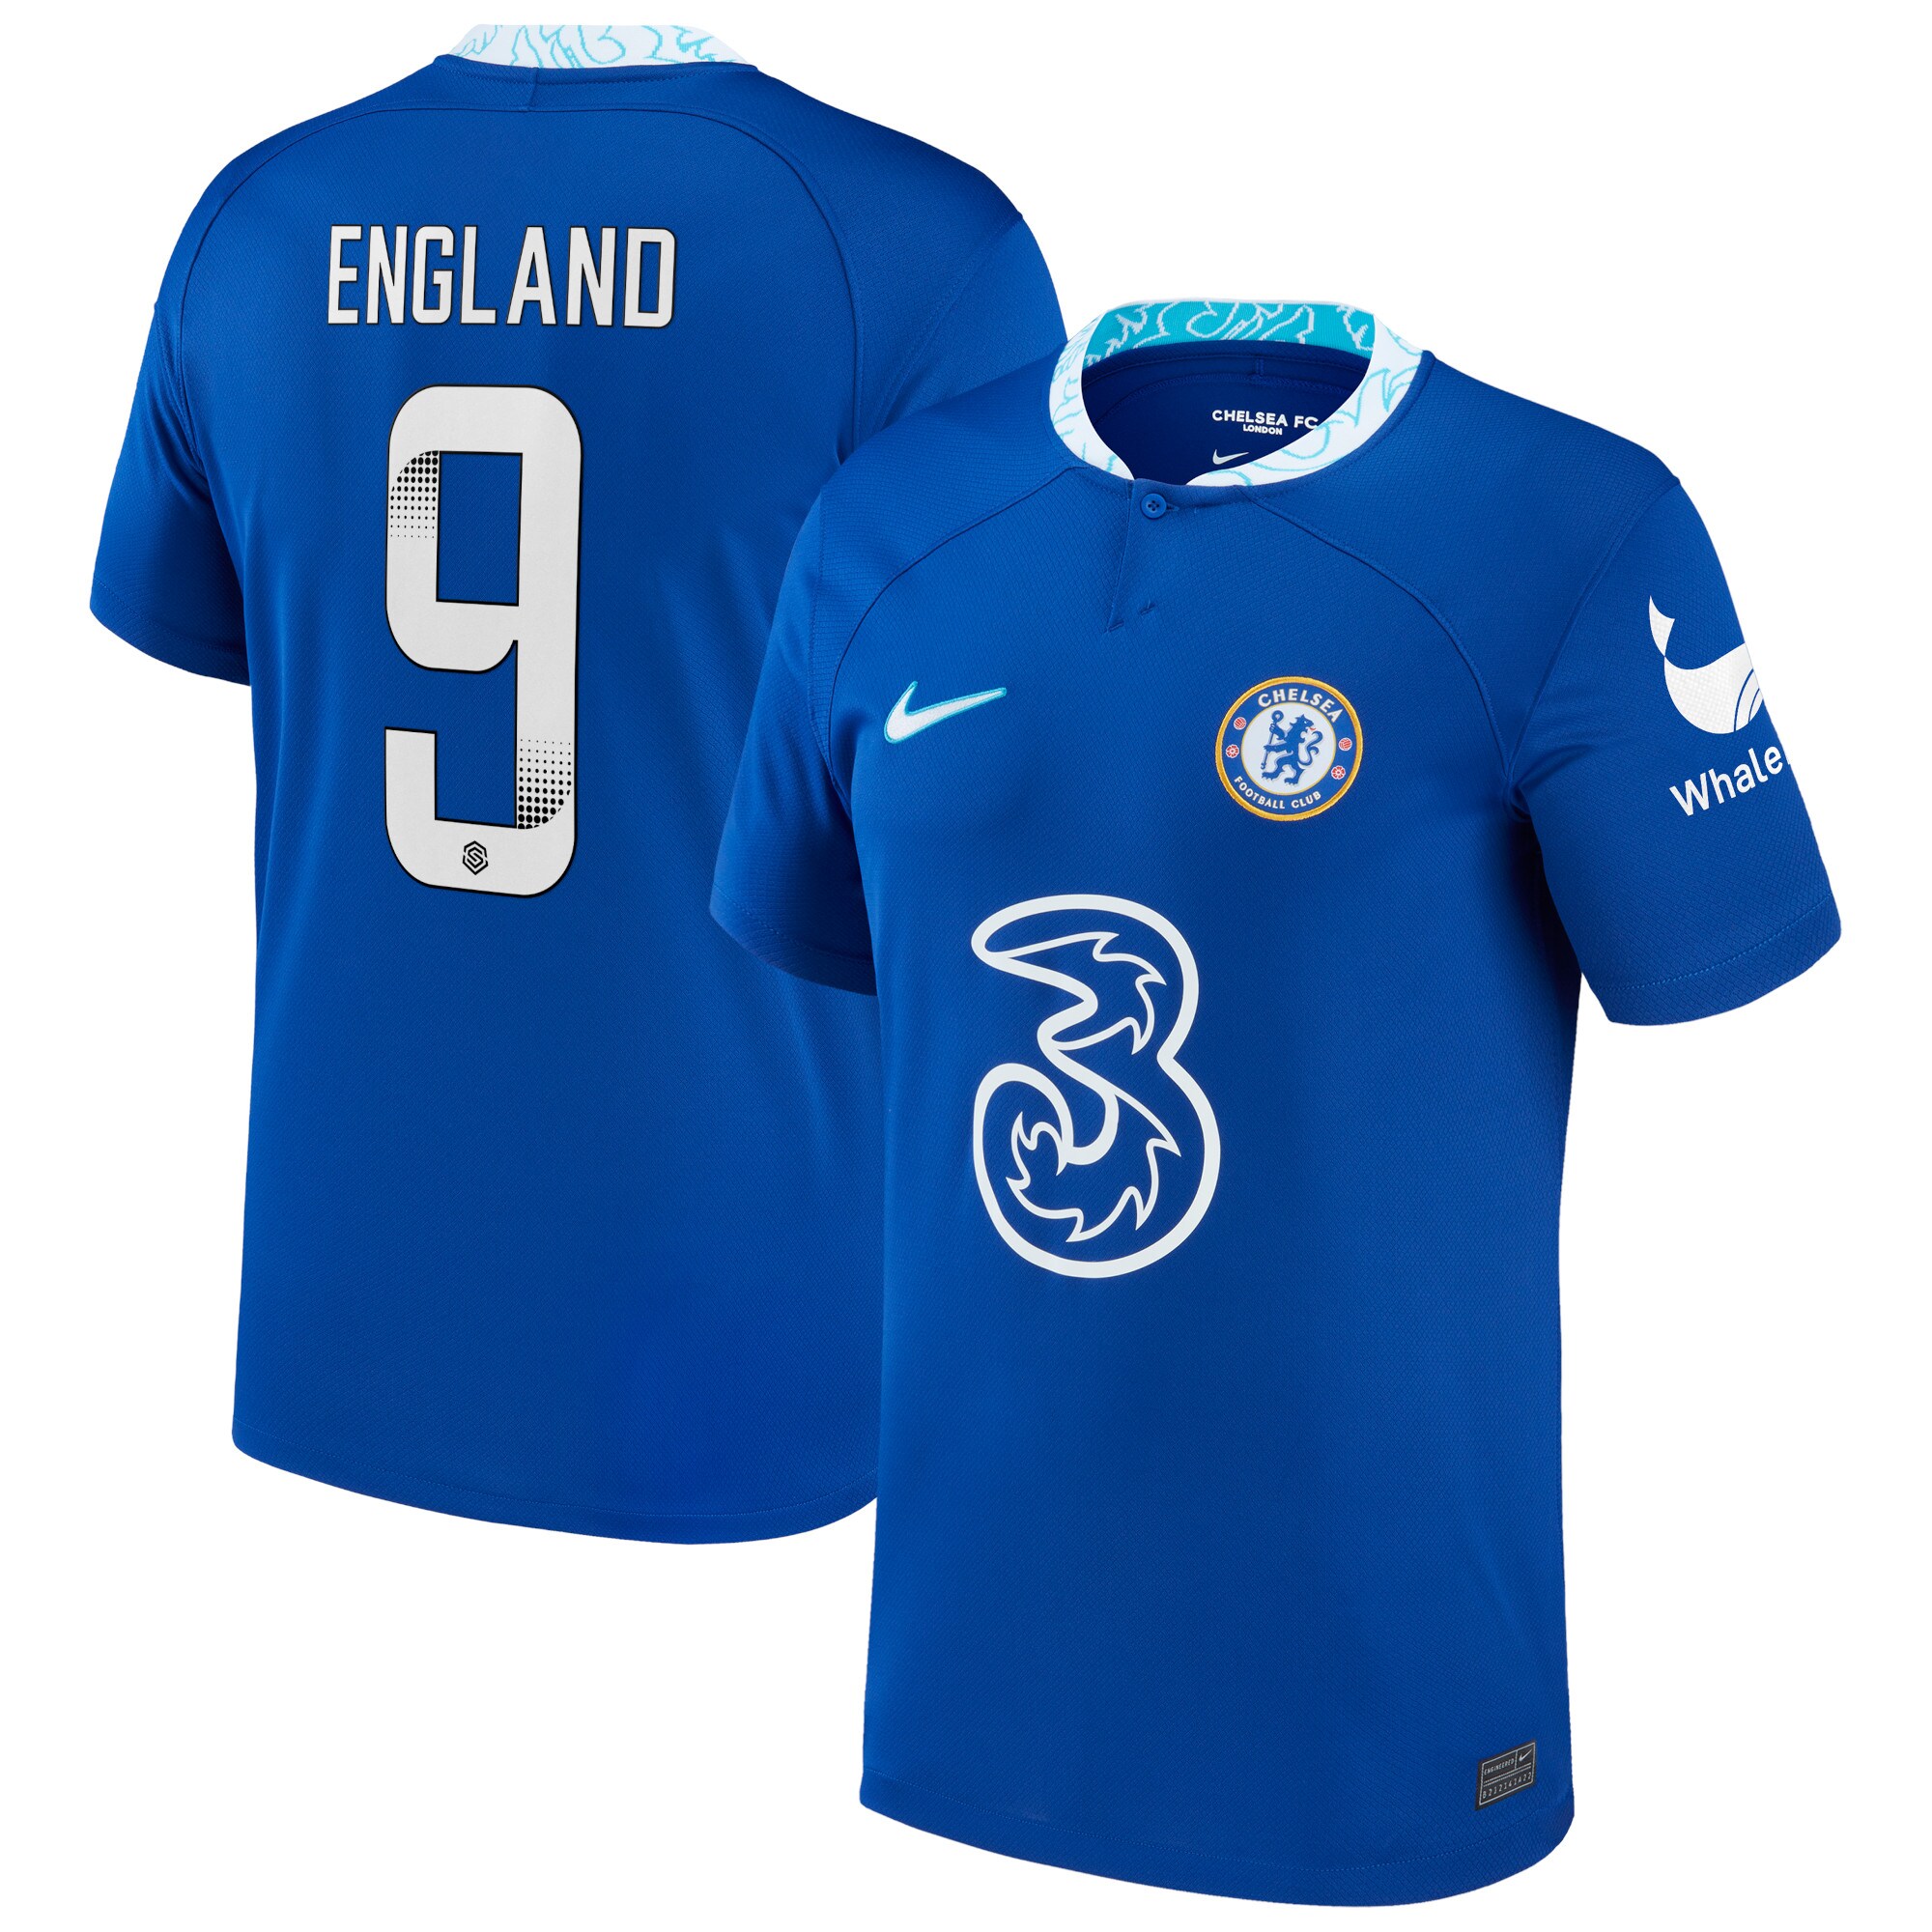 Chelsea WSL Home Stadium Shirt 2022-23 with England 9 printing